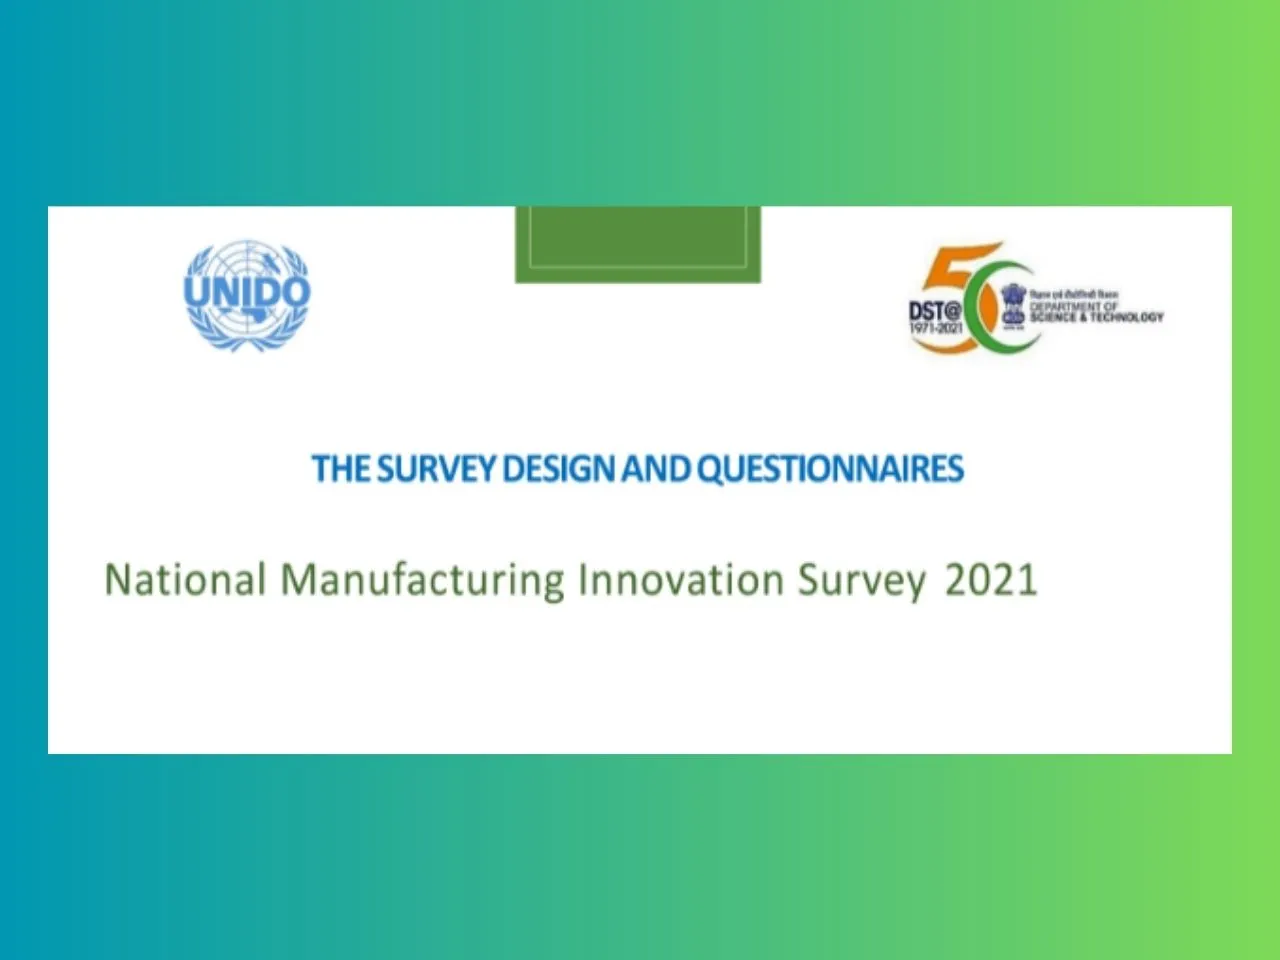 Innovation Not Yet Common in Indian Manufacturing: NMIS 2021-22 Survey